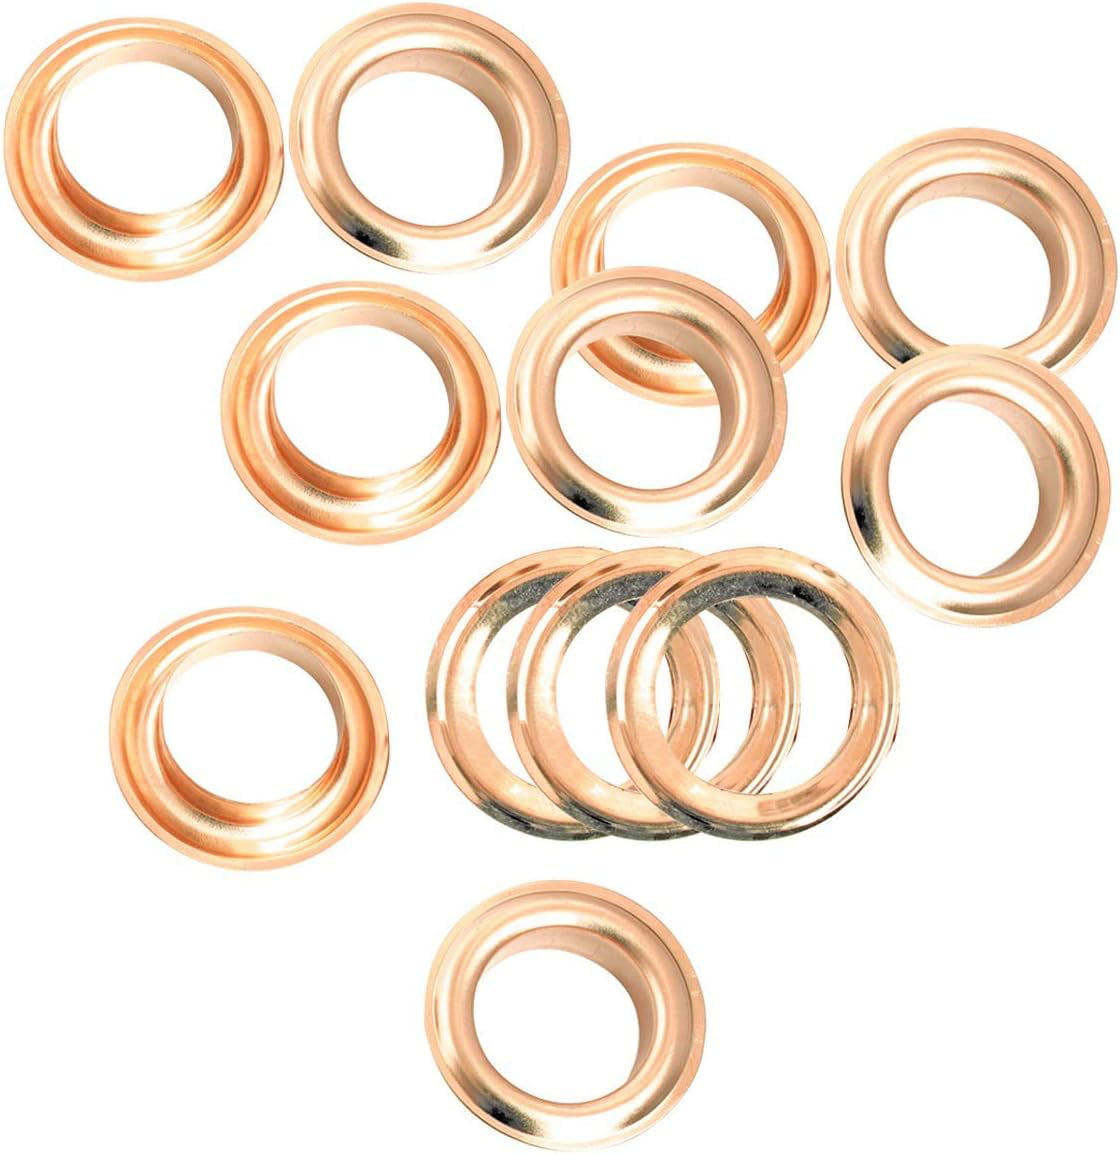 Trimming Shop Oval Eyelets with Washers Brass Rust-Proof Durable Grommets  for DIY Projects, Stationary, Leathercrafts, Banner Making (25mm, Silver,  50pcs) 